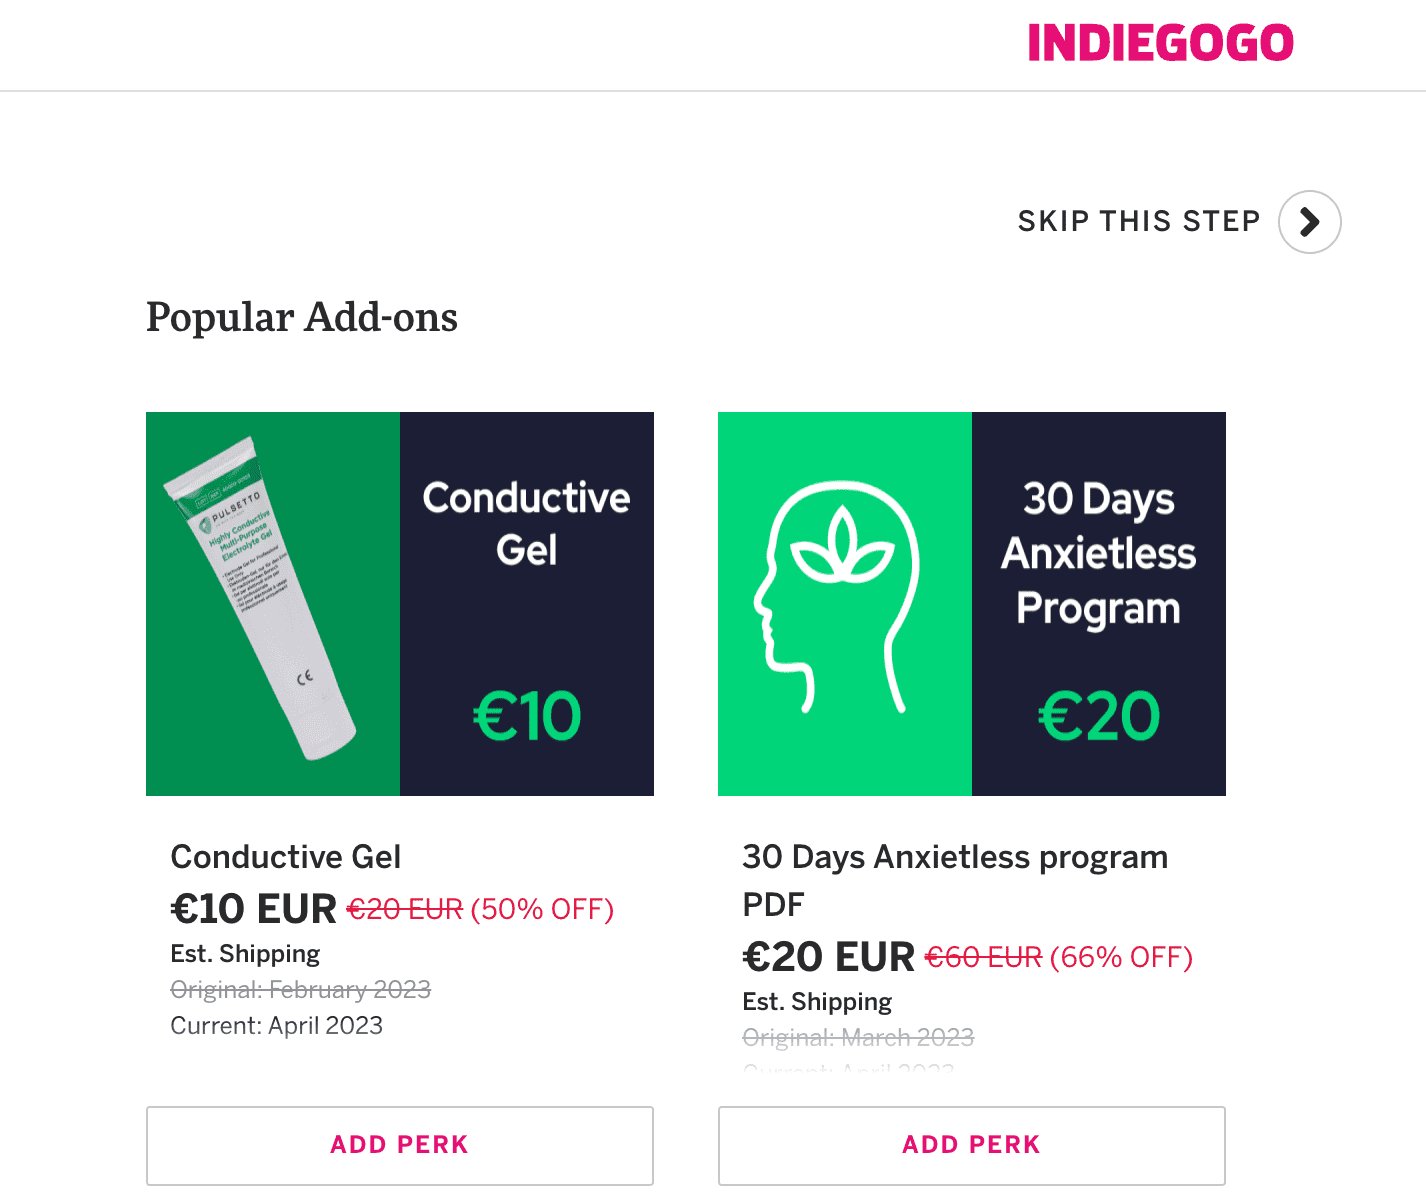 Indiegogo Perks and Add-ons